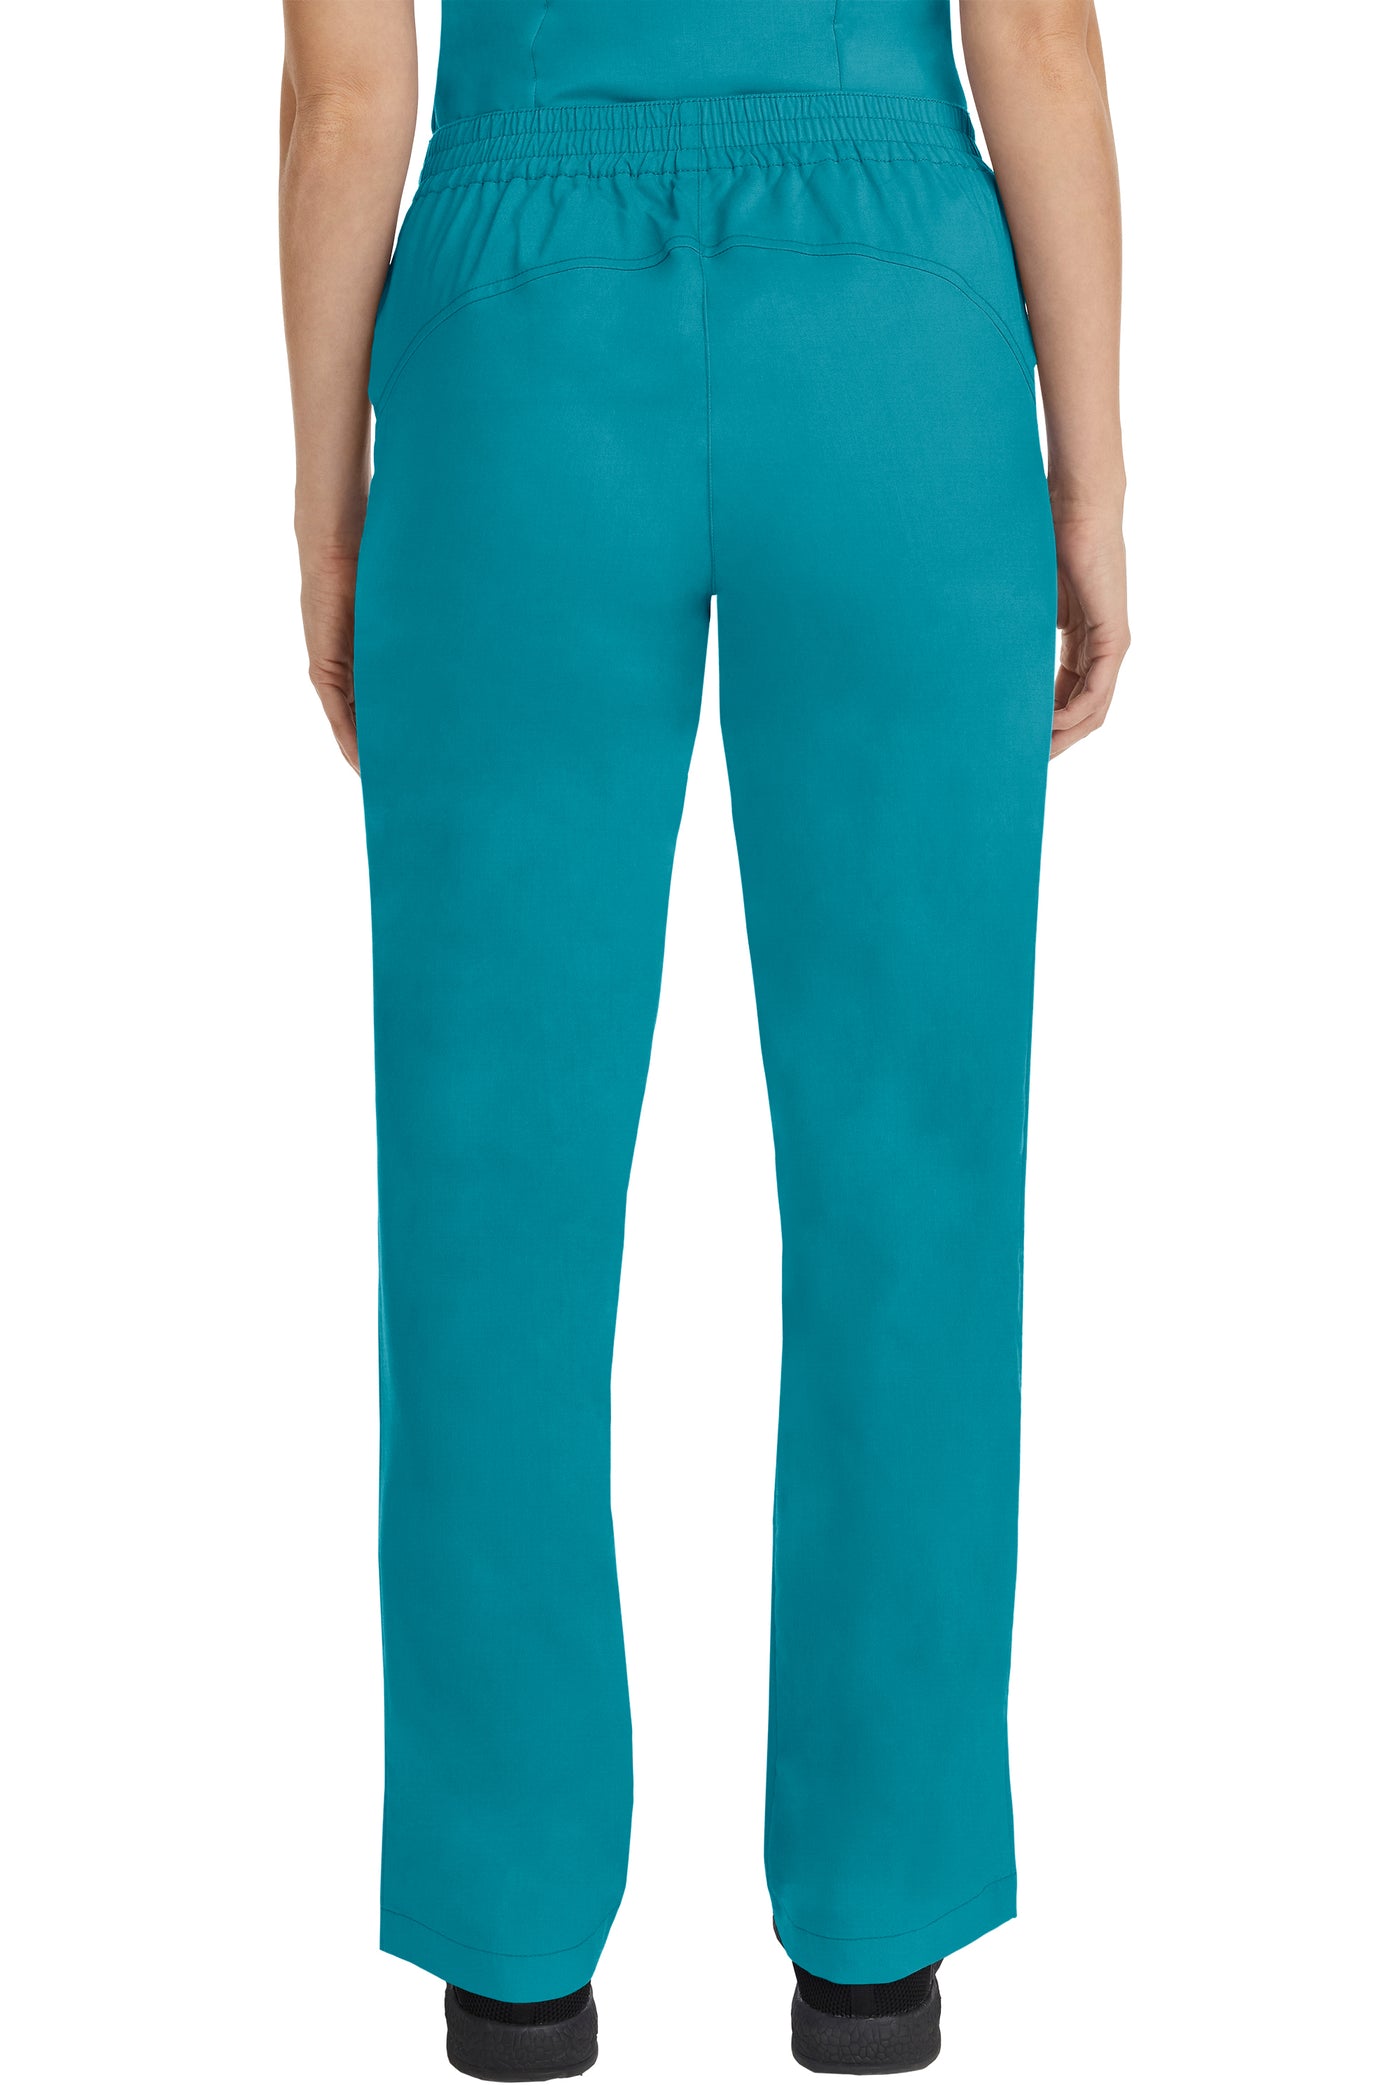 Taylor Pant by Healing Hands XXS-5XL/  TEAL